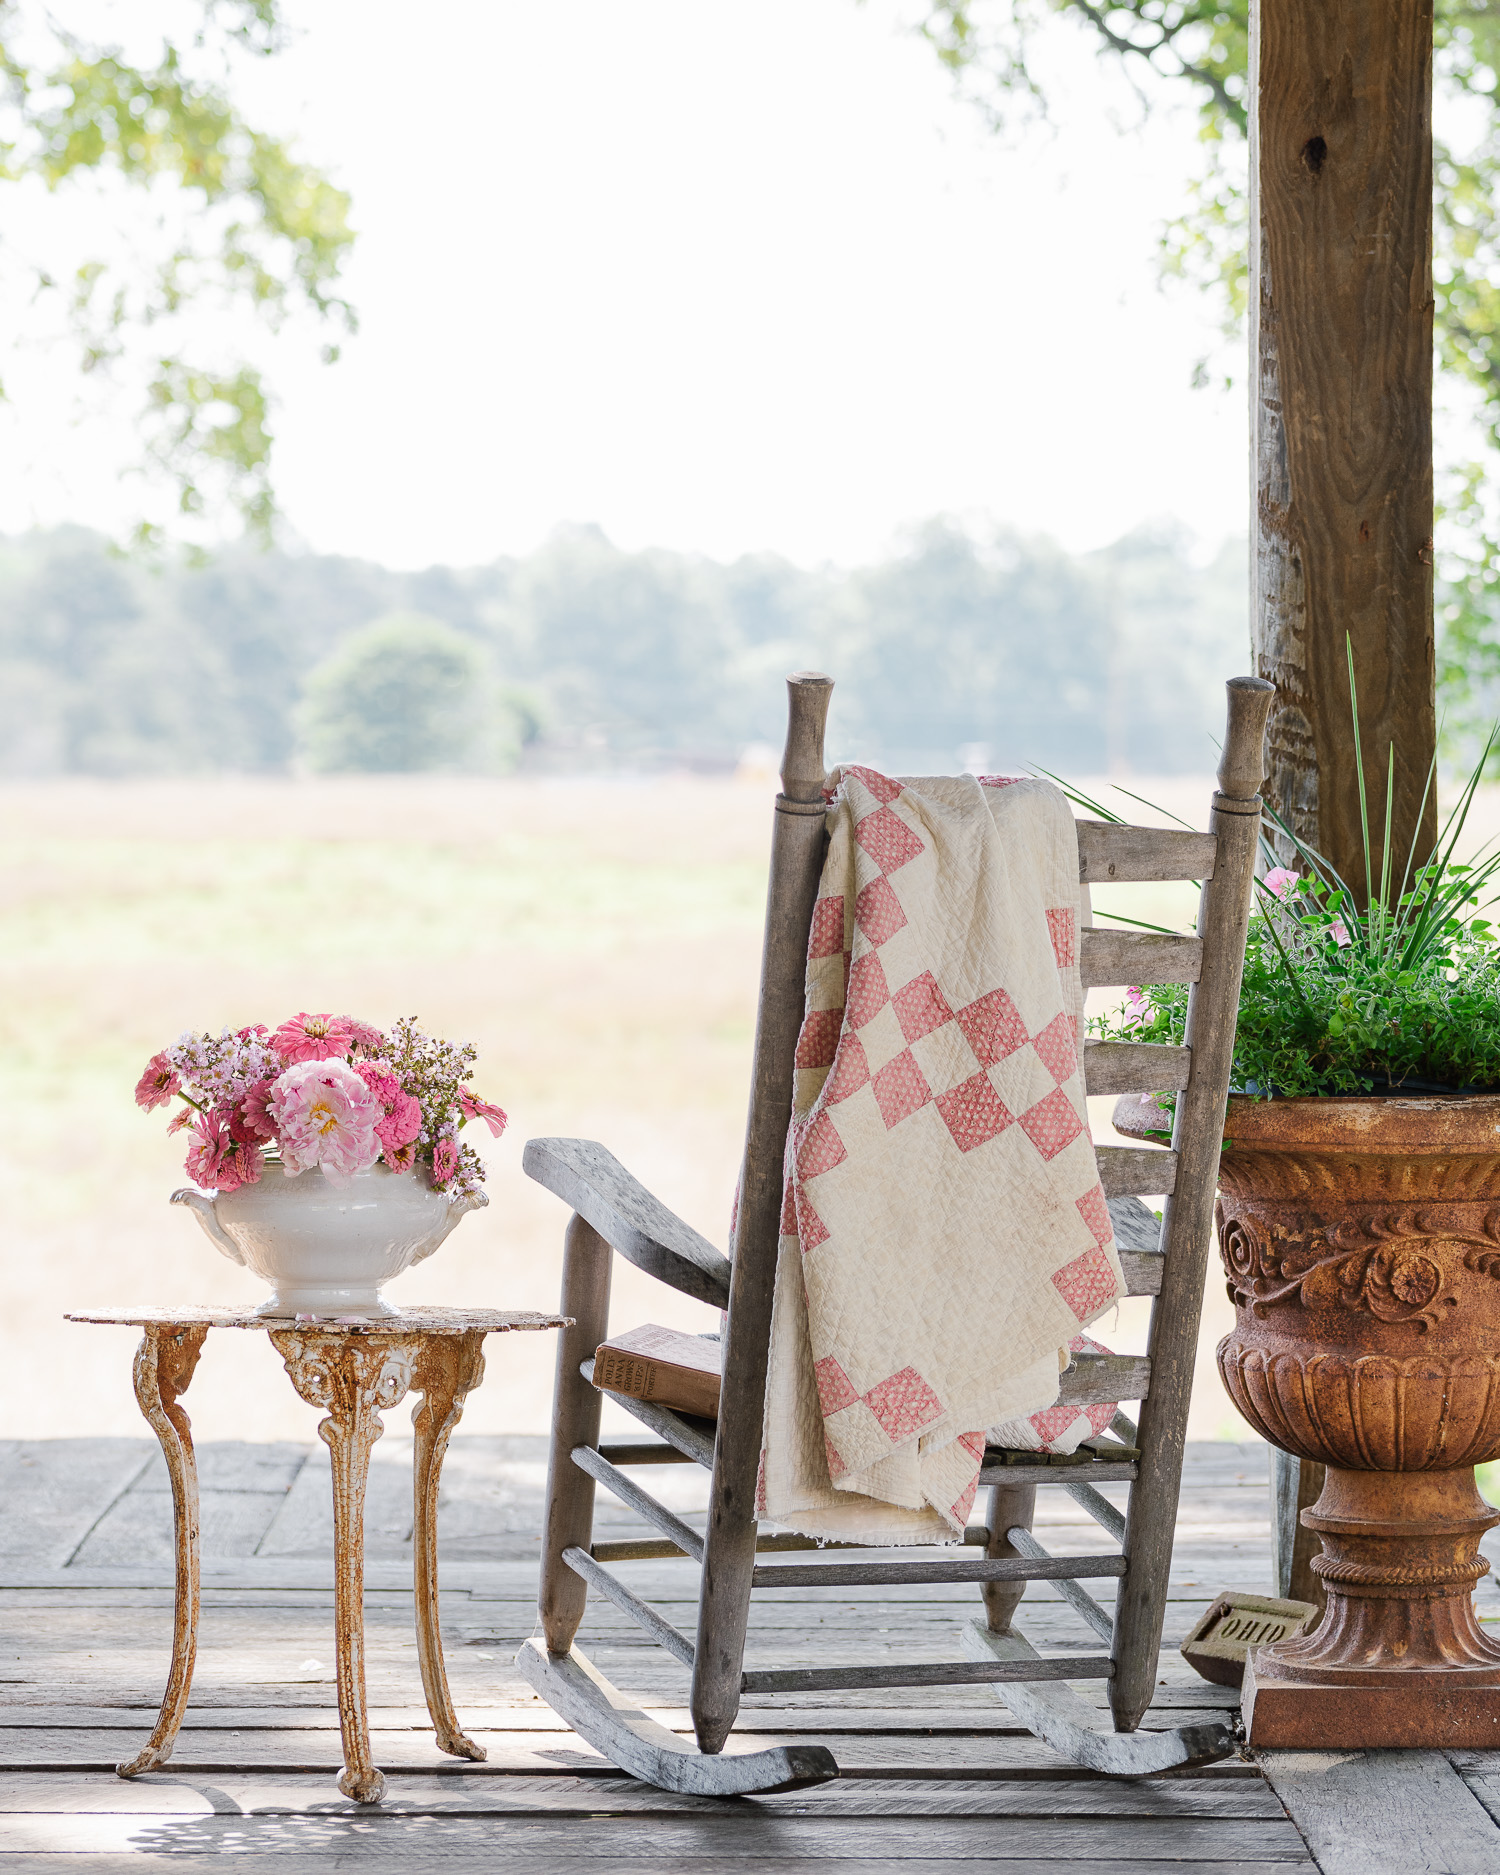 Barn Porch View, Rocking Chair, vintage table with flowers in ironstone